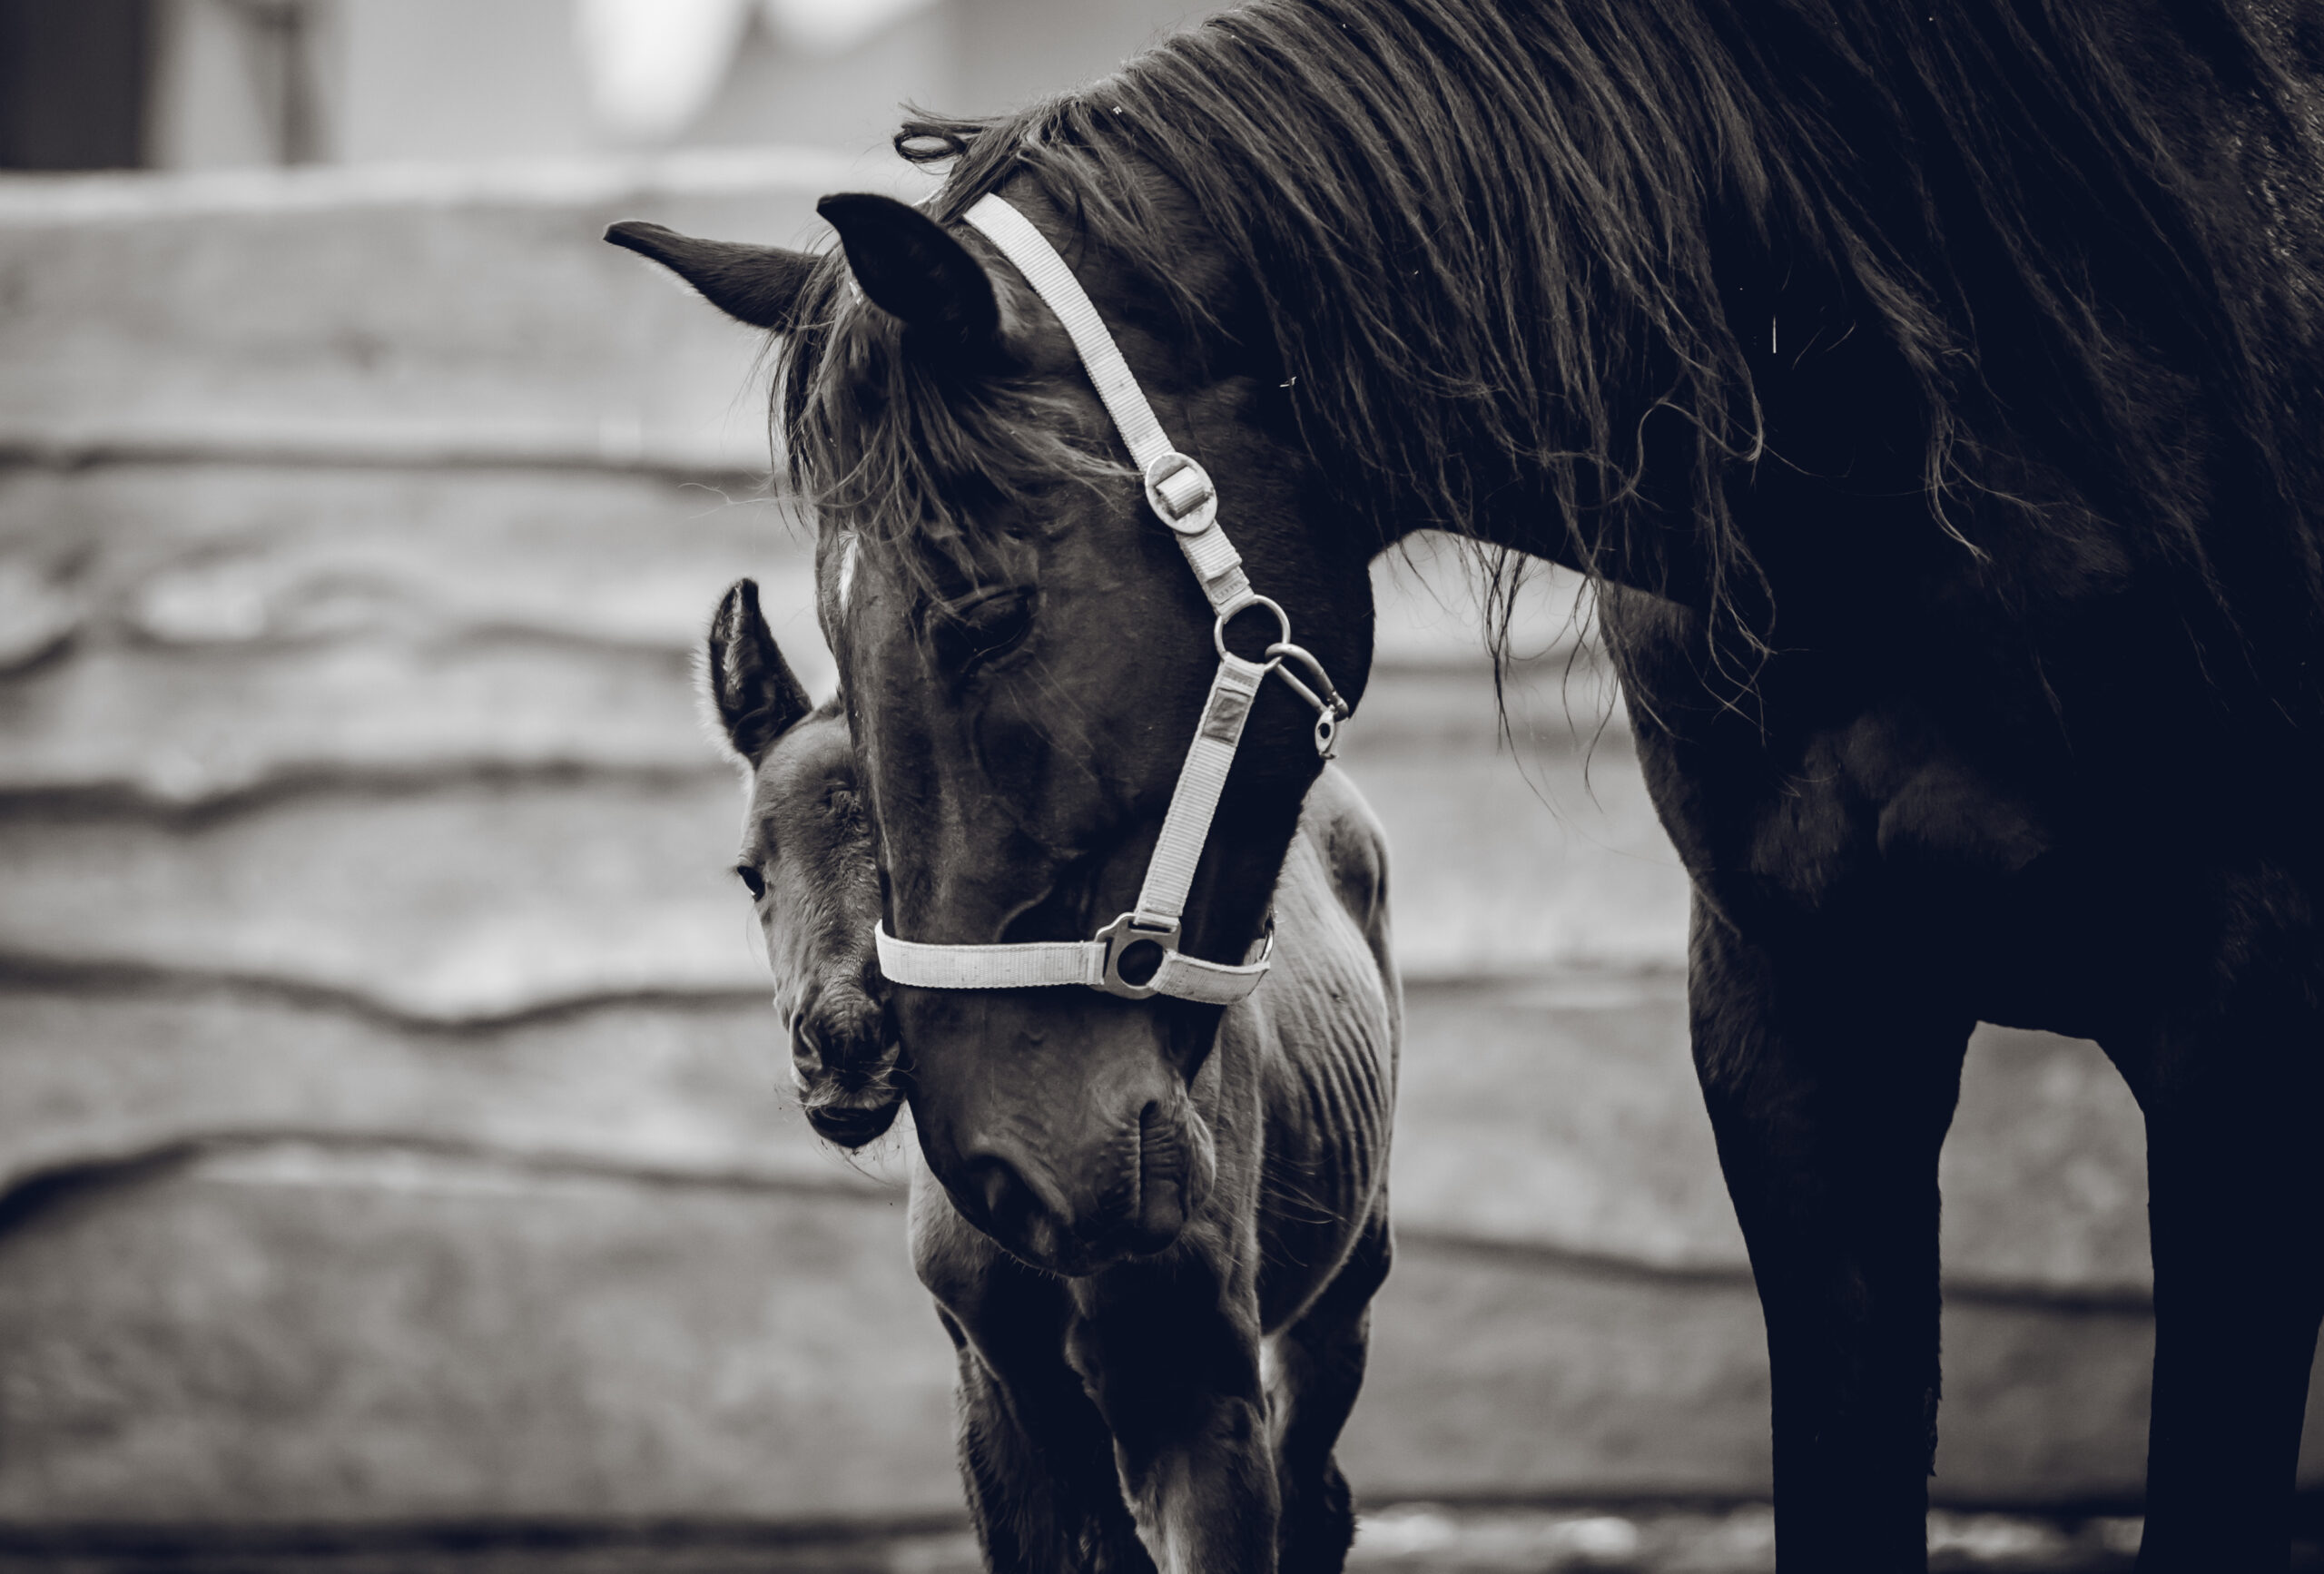 A newborn colt walks in the pen with her mother